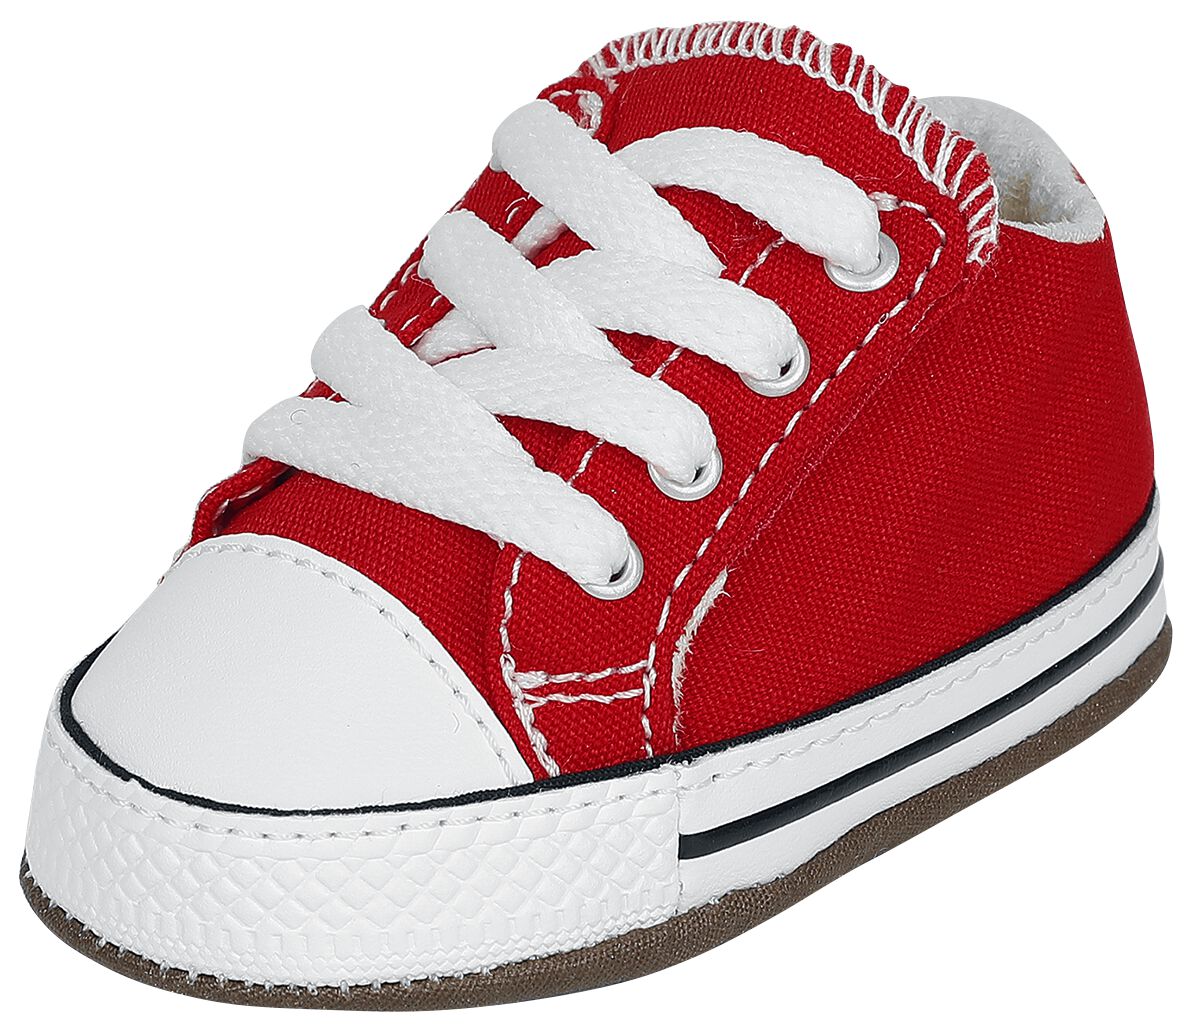 Converse Chuck Taylor All Star Cribster - MID Baby shoes red